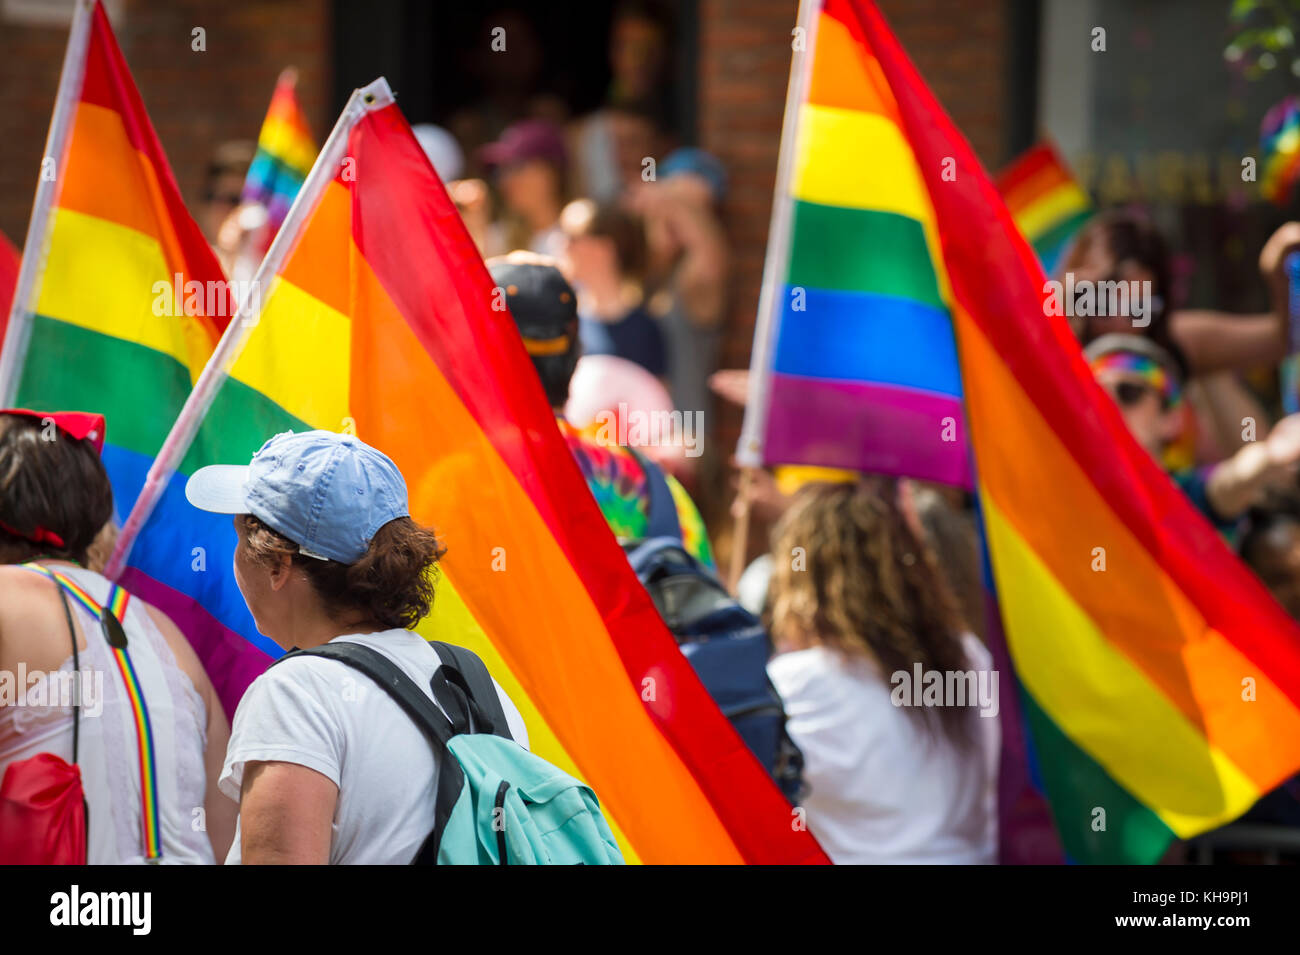 NEW YORK CITY - JUNE 25, 2017: Supporters wave rainbows flags on the sidelines of the annual Pride Parade as it passes through Greenwich Village. Stock Photo